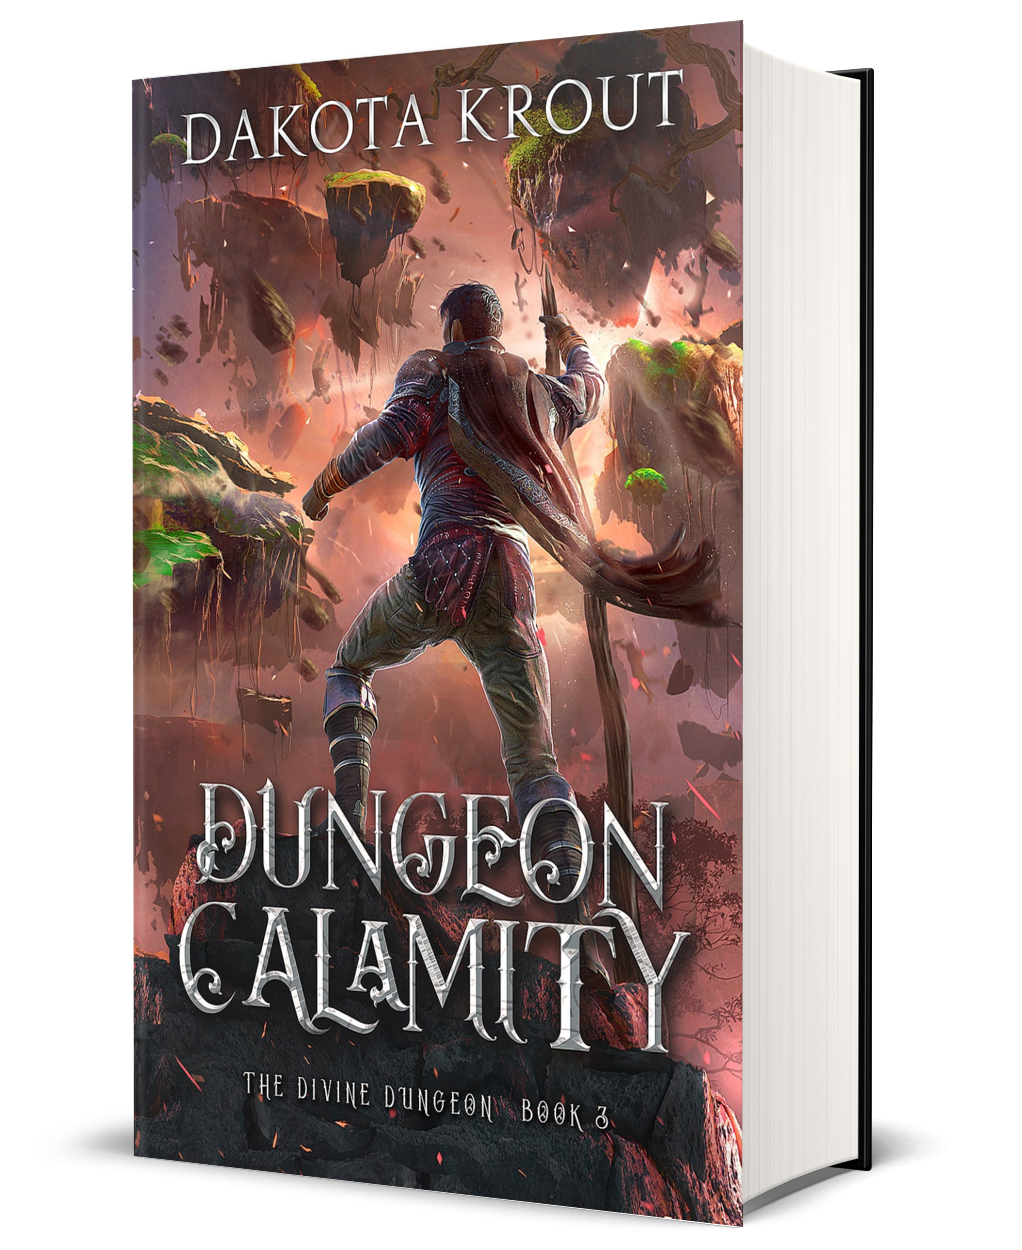 Dungeon Calamity Signed Hardcover